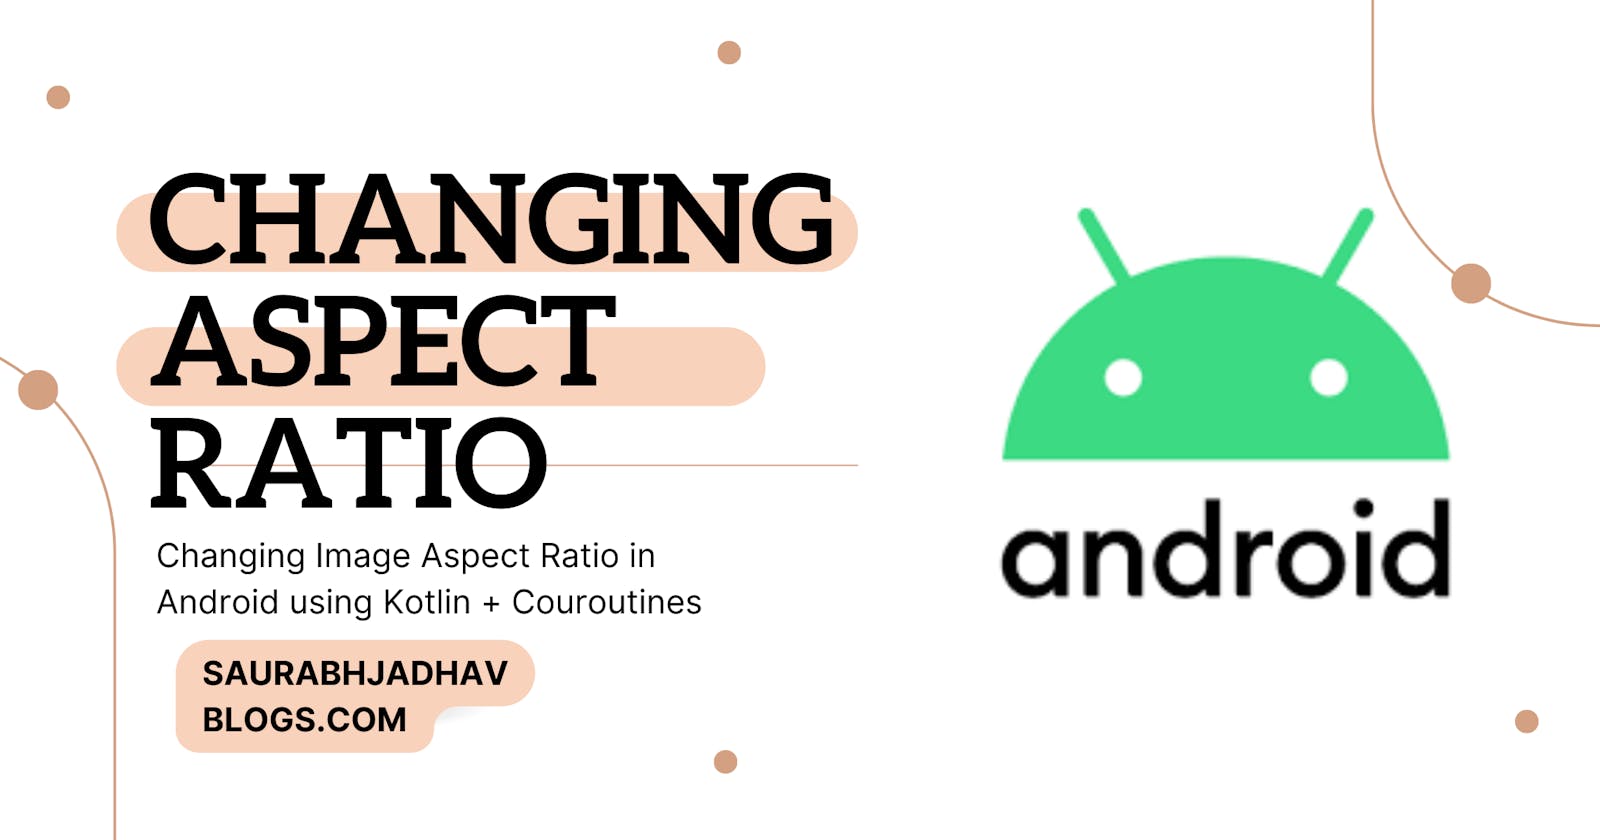 Changing Image Aspect Ratio in Android using Kotlin + Couroutines